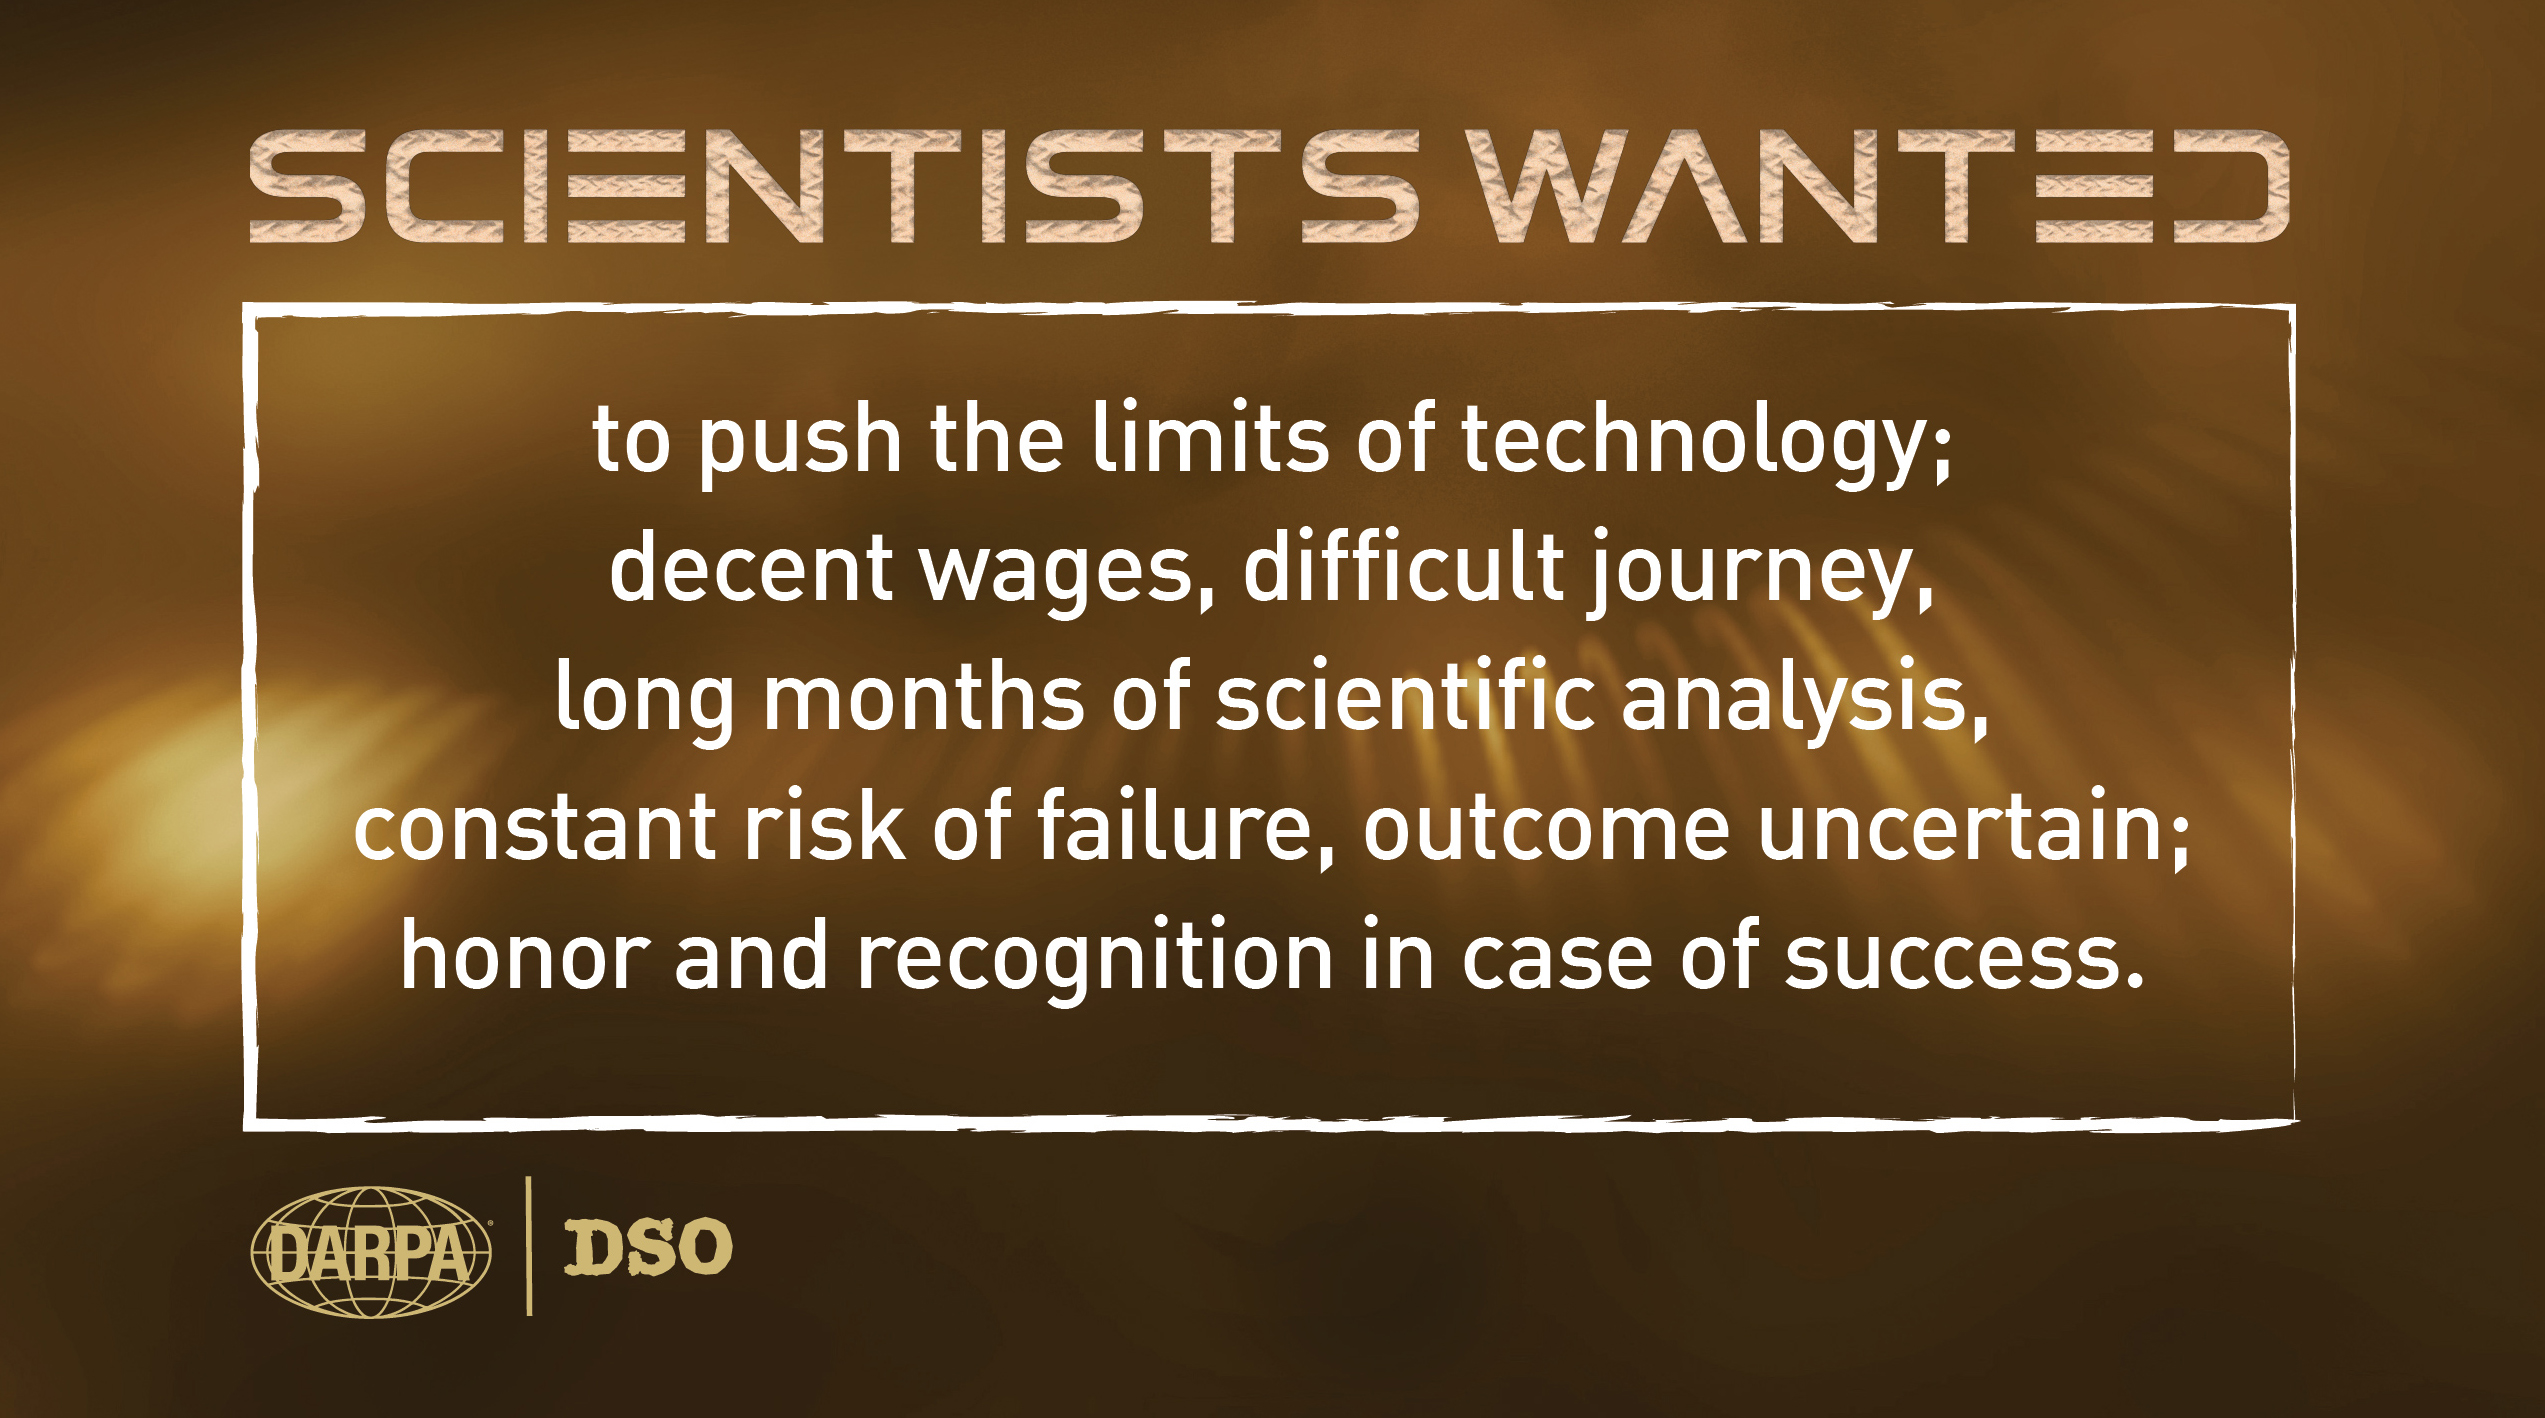 Scientists wanted - to push the limites of technology; decent wages, difficult journey, long months of scientific analysis, constant risk of failure, outcome uncertain; honor and recognition in case of success